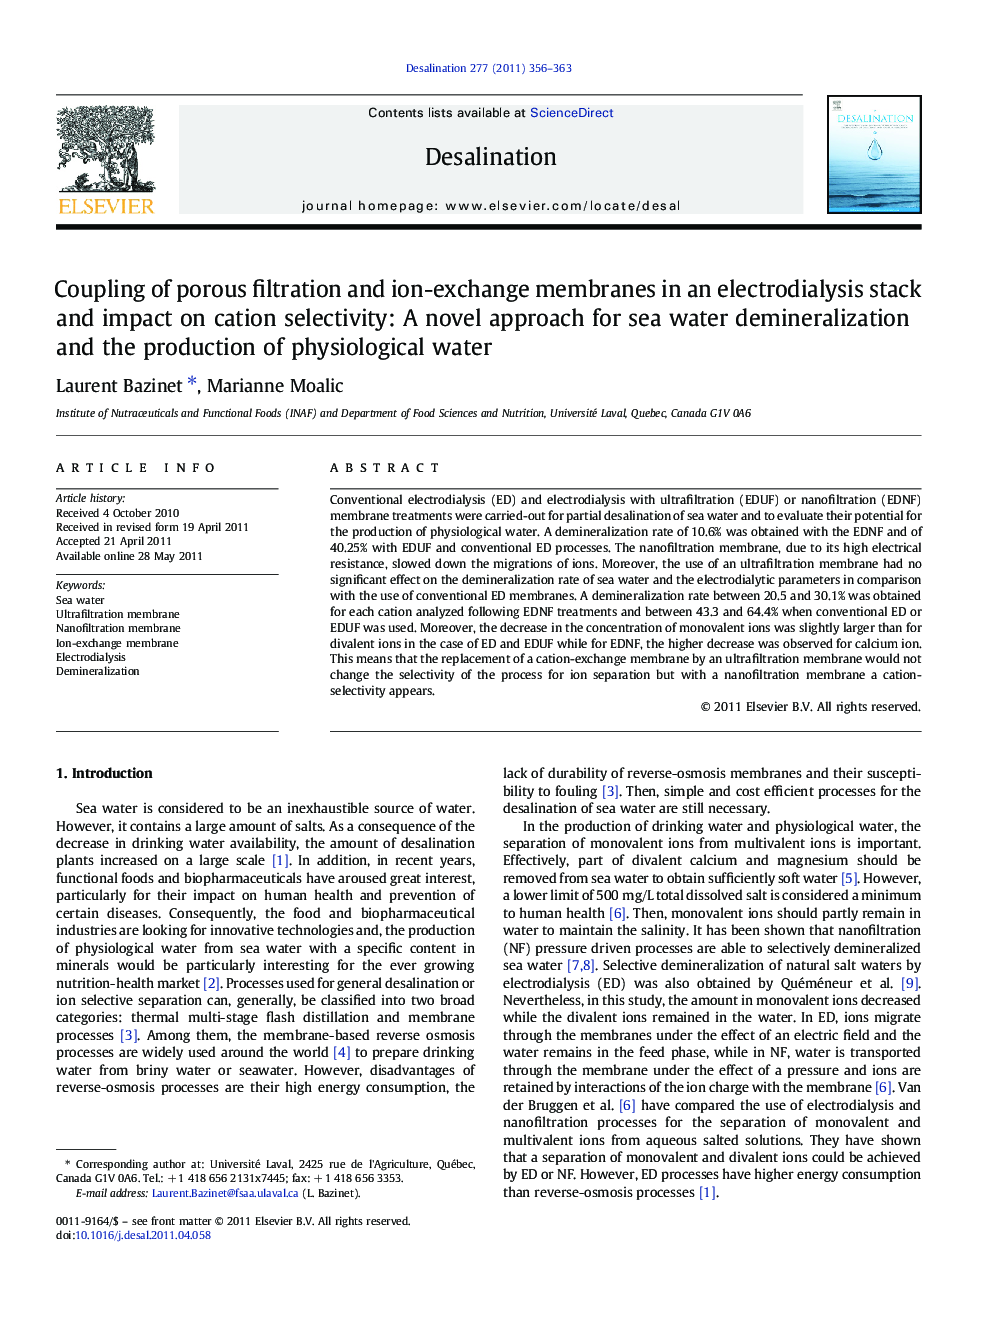 Coupling of porous filtration and ion-exchange membranes in an electrodialysis stack and impact on cation selectivity: A novel approach for sea water demineralization and the production of physiological water